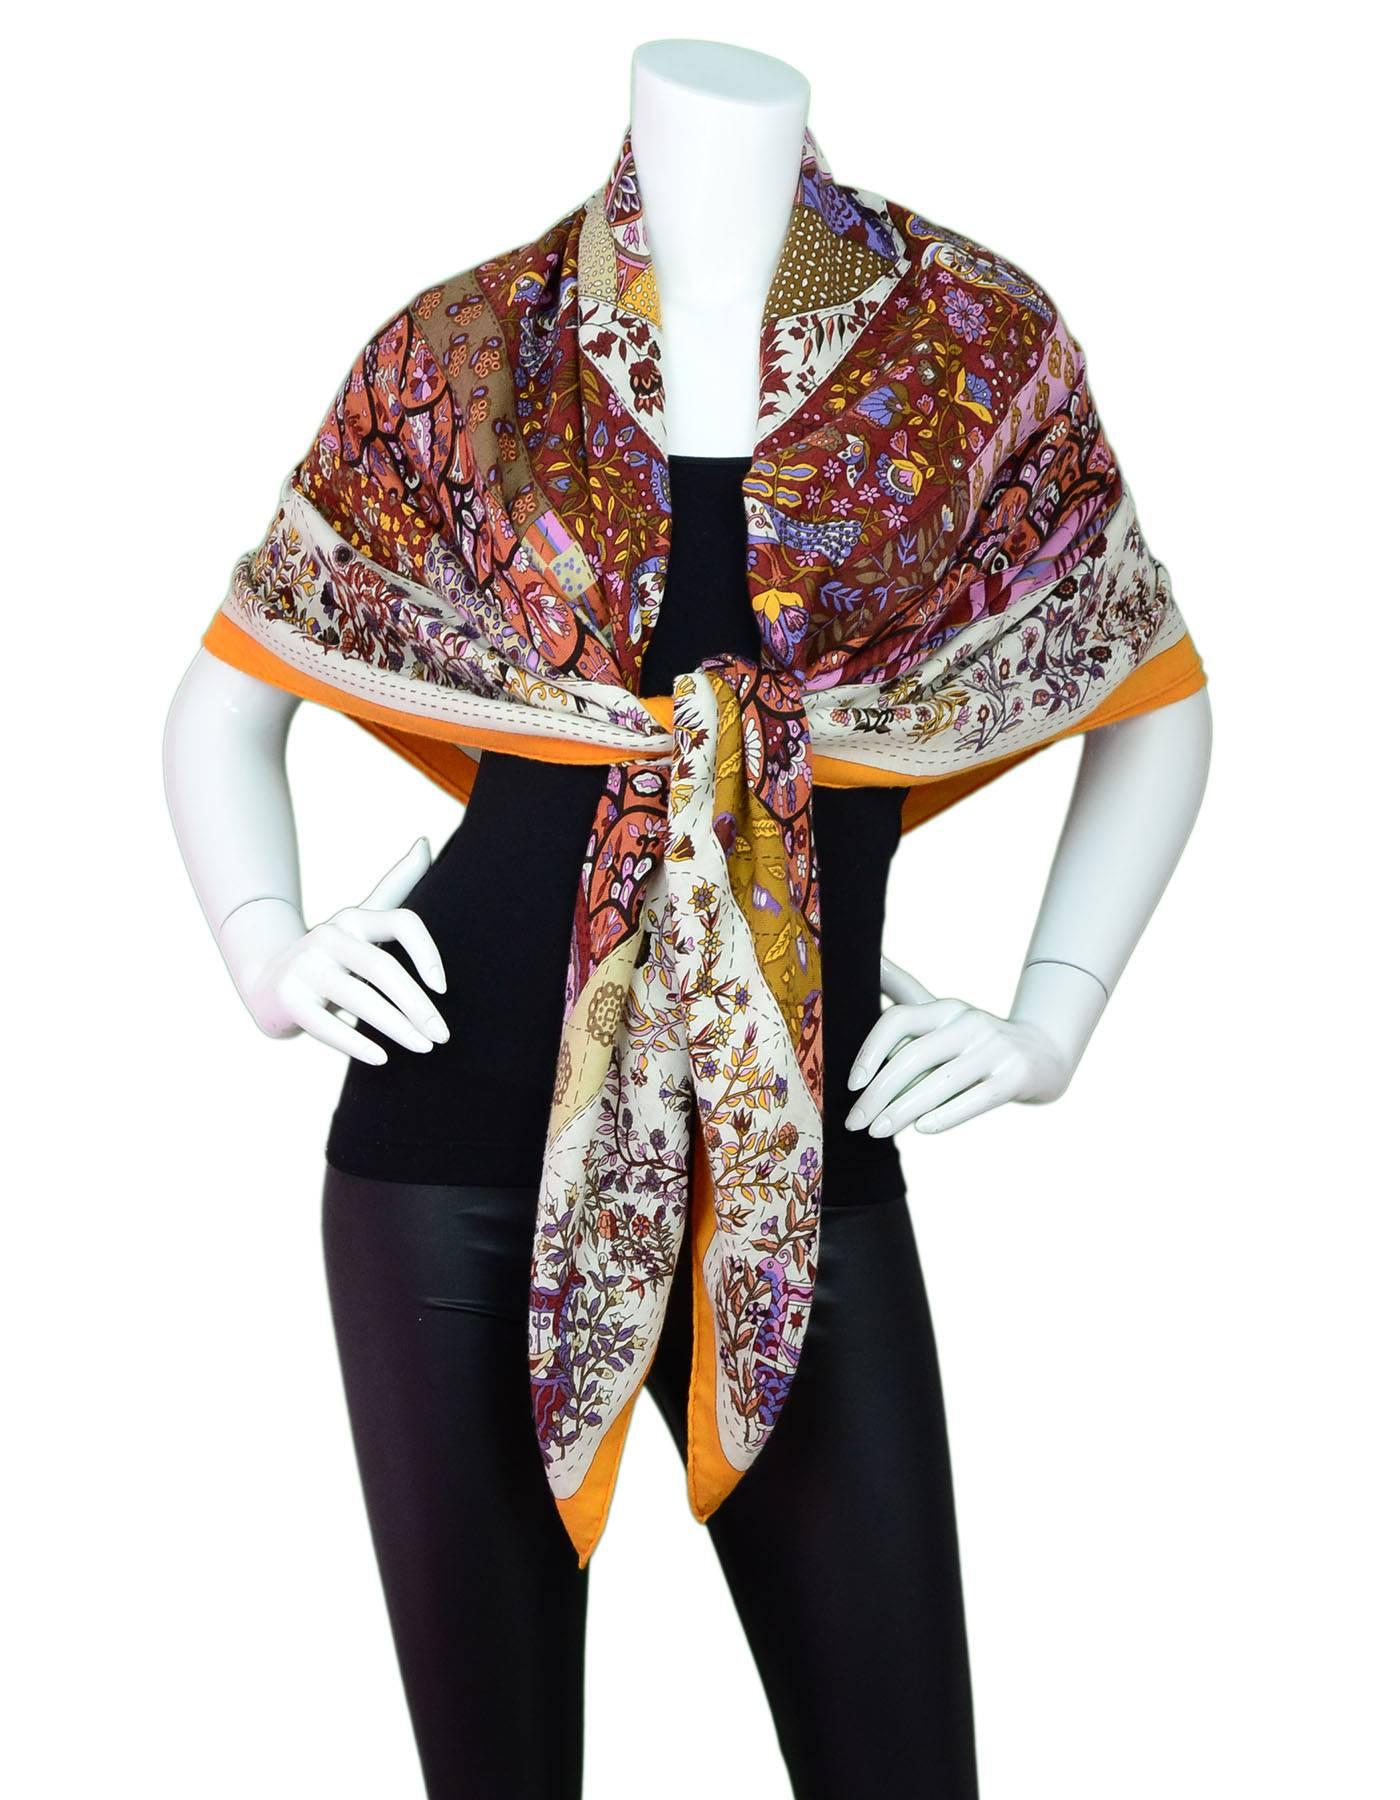 Hermes Orange Pique Fleuri Cashmere & Silk 140cm Shawl

Made In: France
Color: Orange
Composition: 65% cashmere, 35% silk
Retail Price: $1,100 + tax
Overall Condition: Excellent pre-owned condition

Measurements:
Length: 52